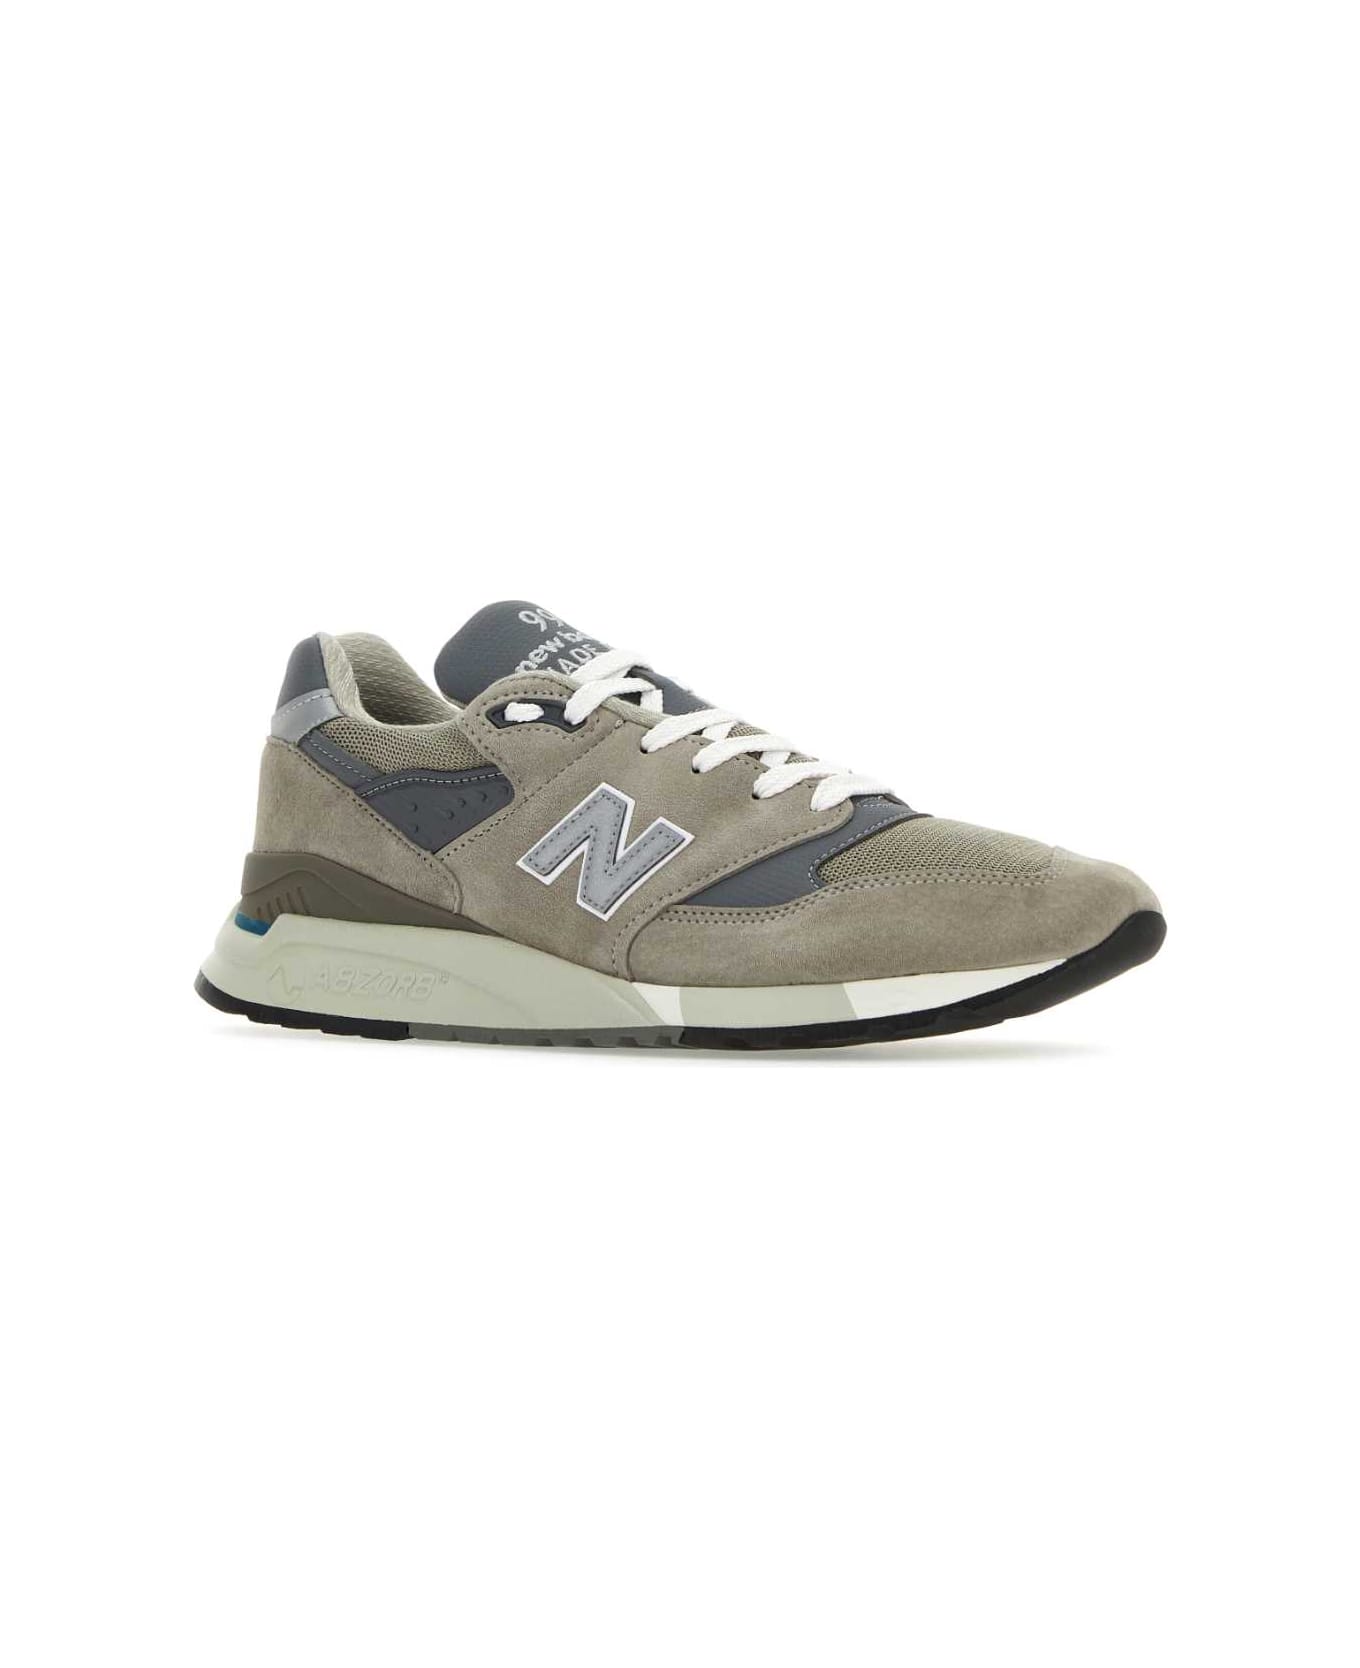 New Balance Multicolor Suede And Fabric U998gr Sneakers - GREY スニーカー